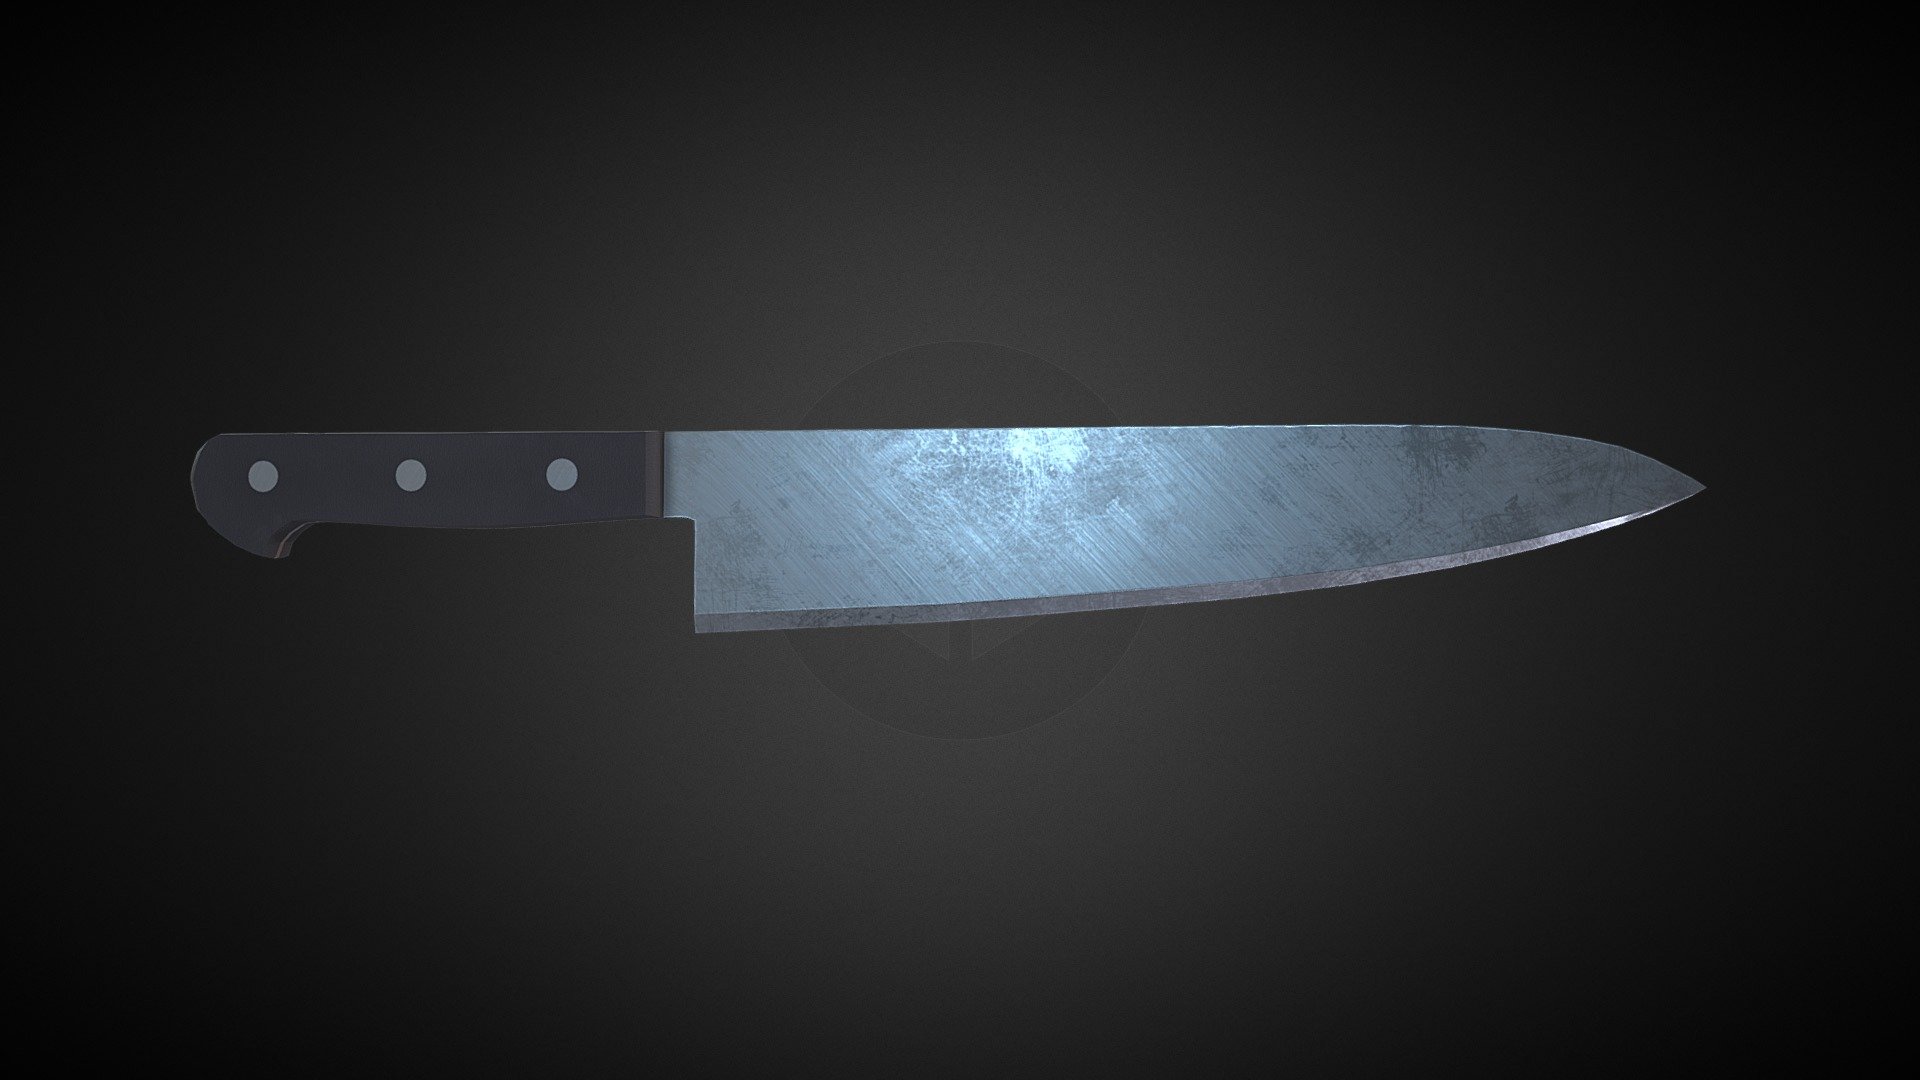 Used kitchen knife (Lowpoly).

4k quality textures.

Textured with Substance Painter 2 3d model